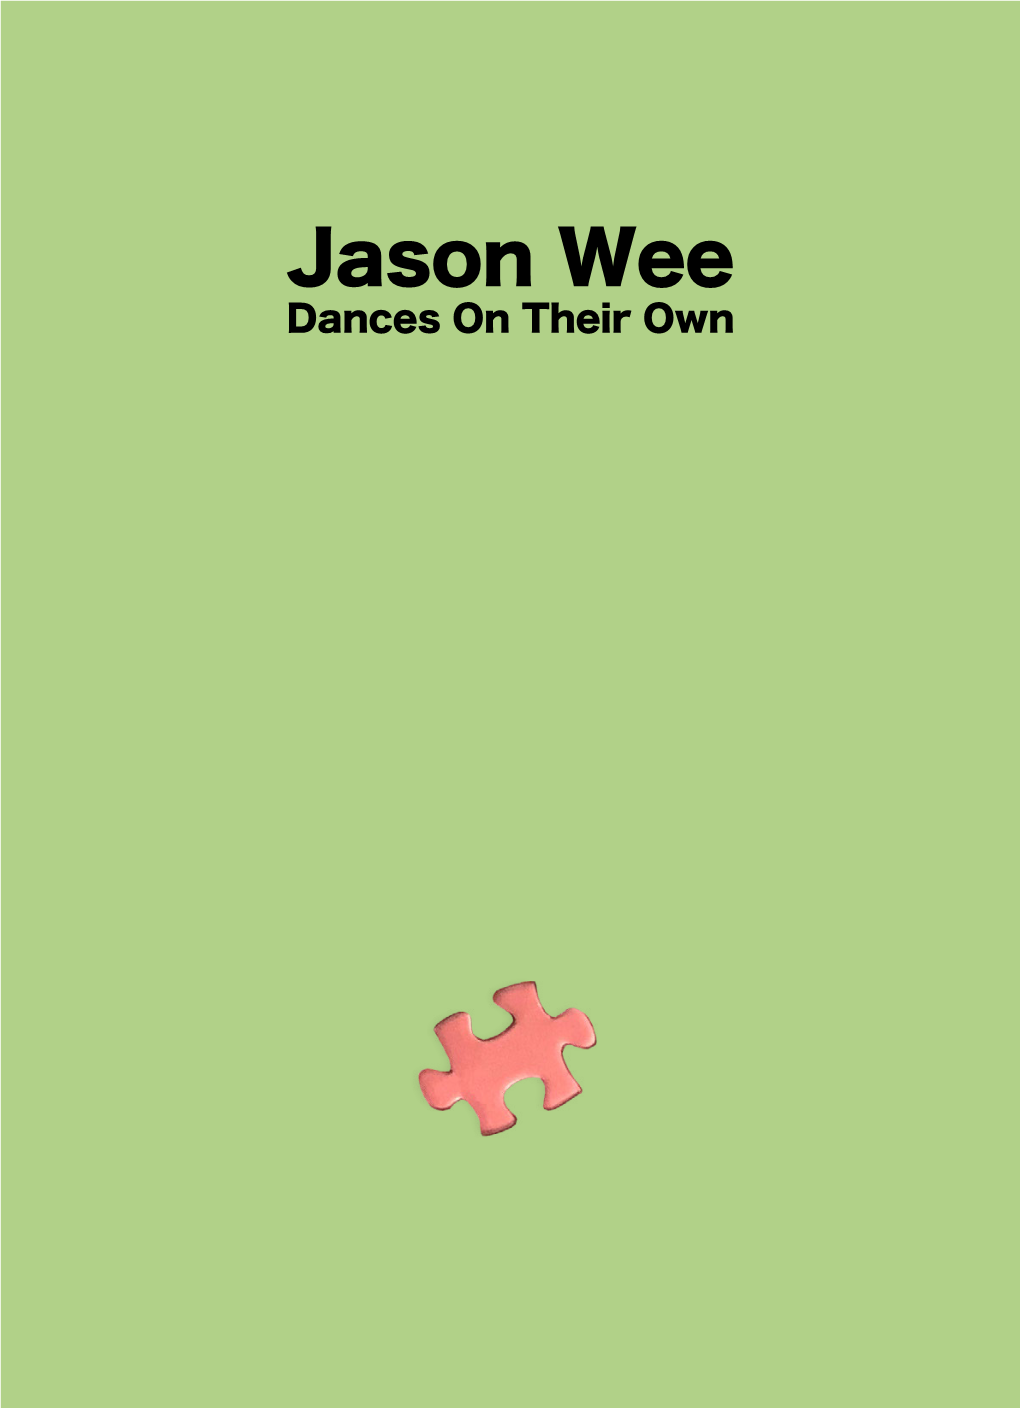 Jason Wee Dances on Their Own Dances on Their Own 02 - 18 May 2019